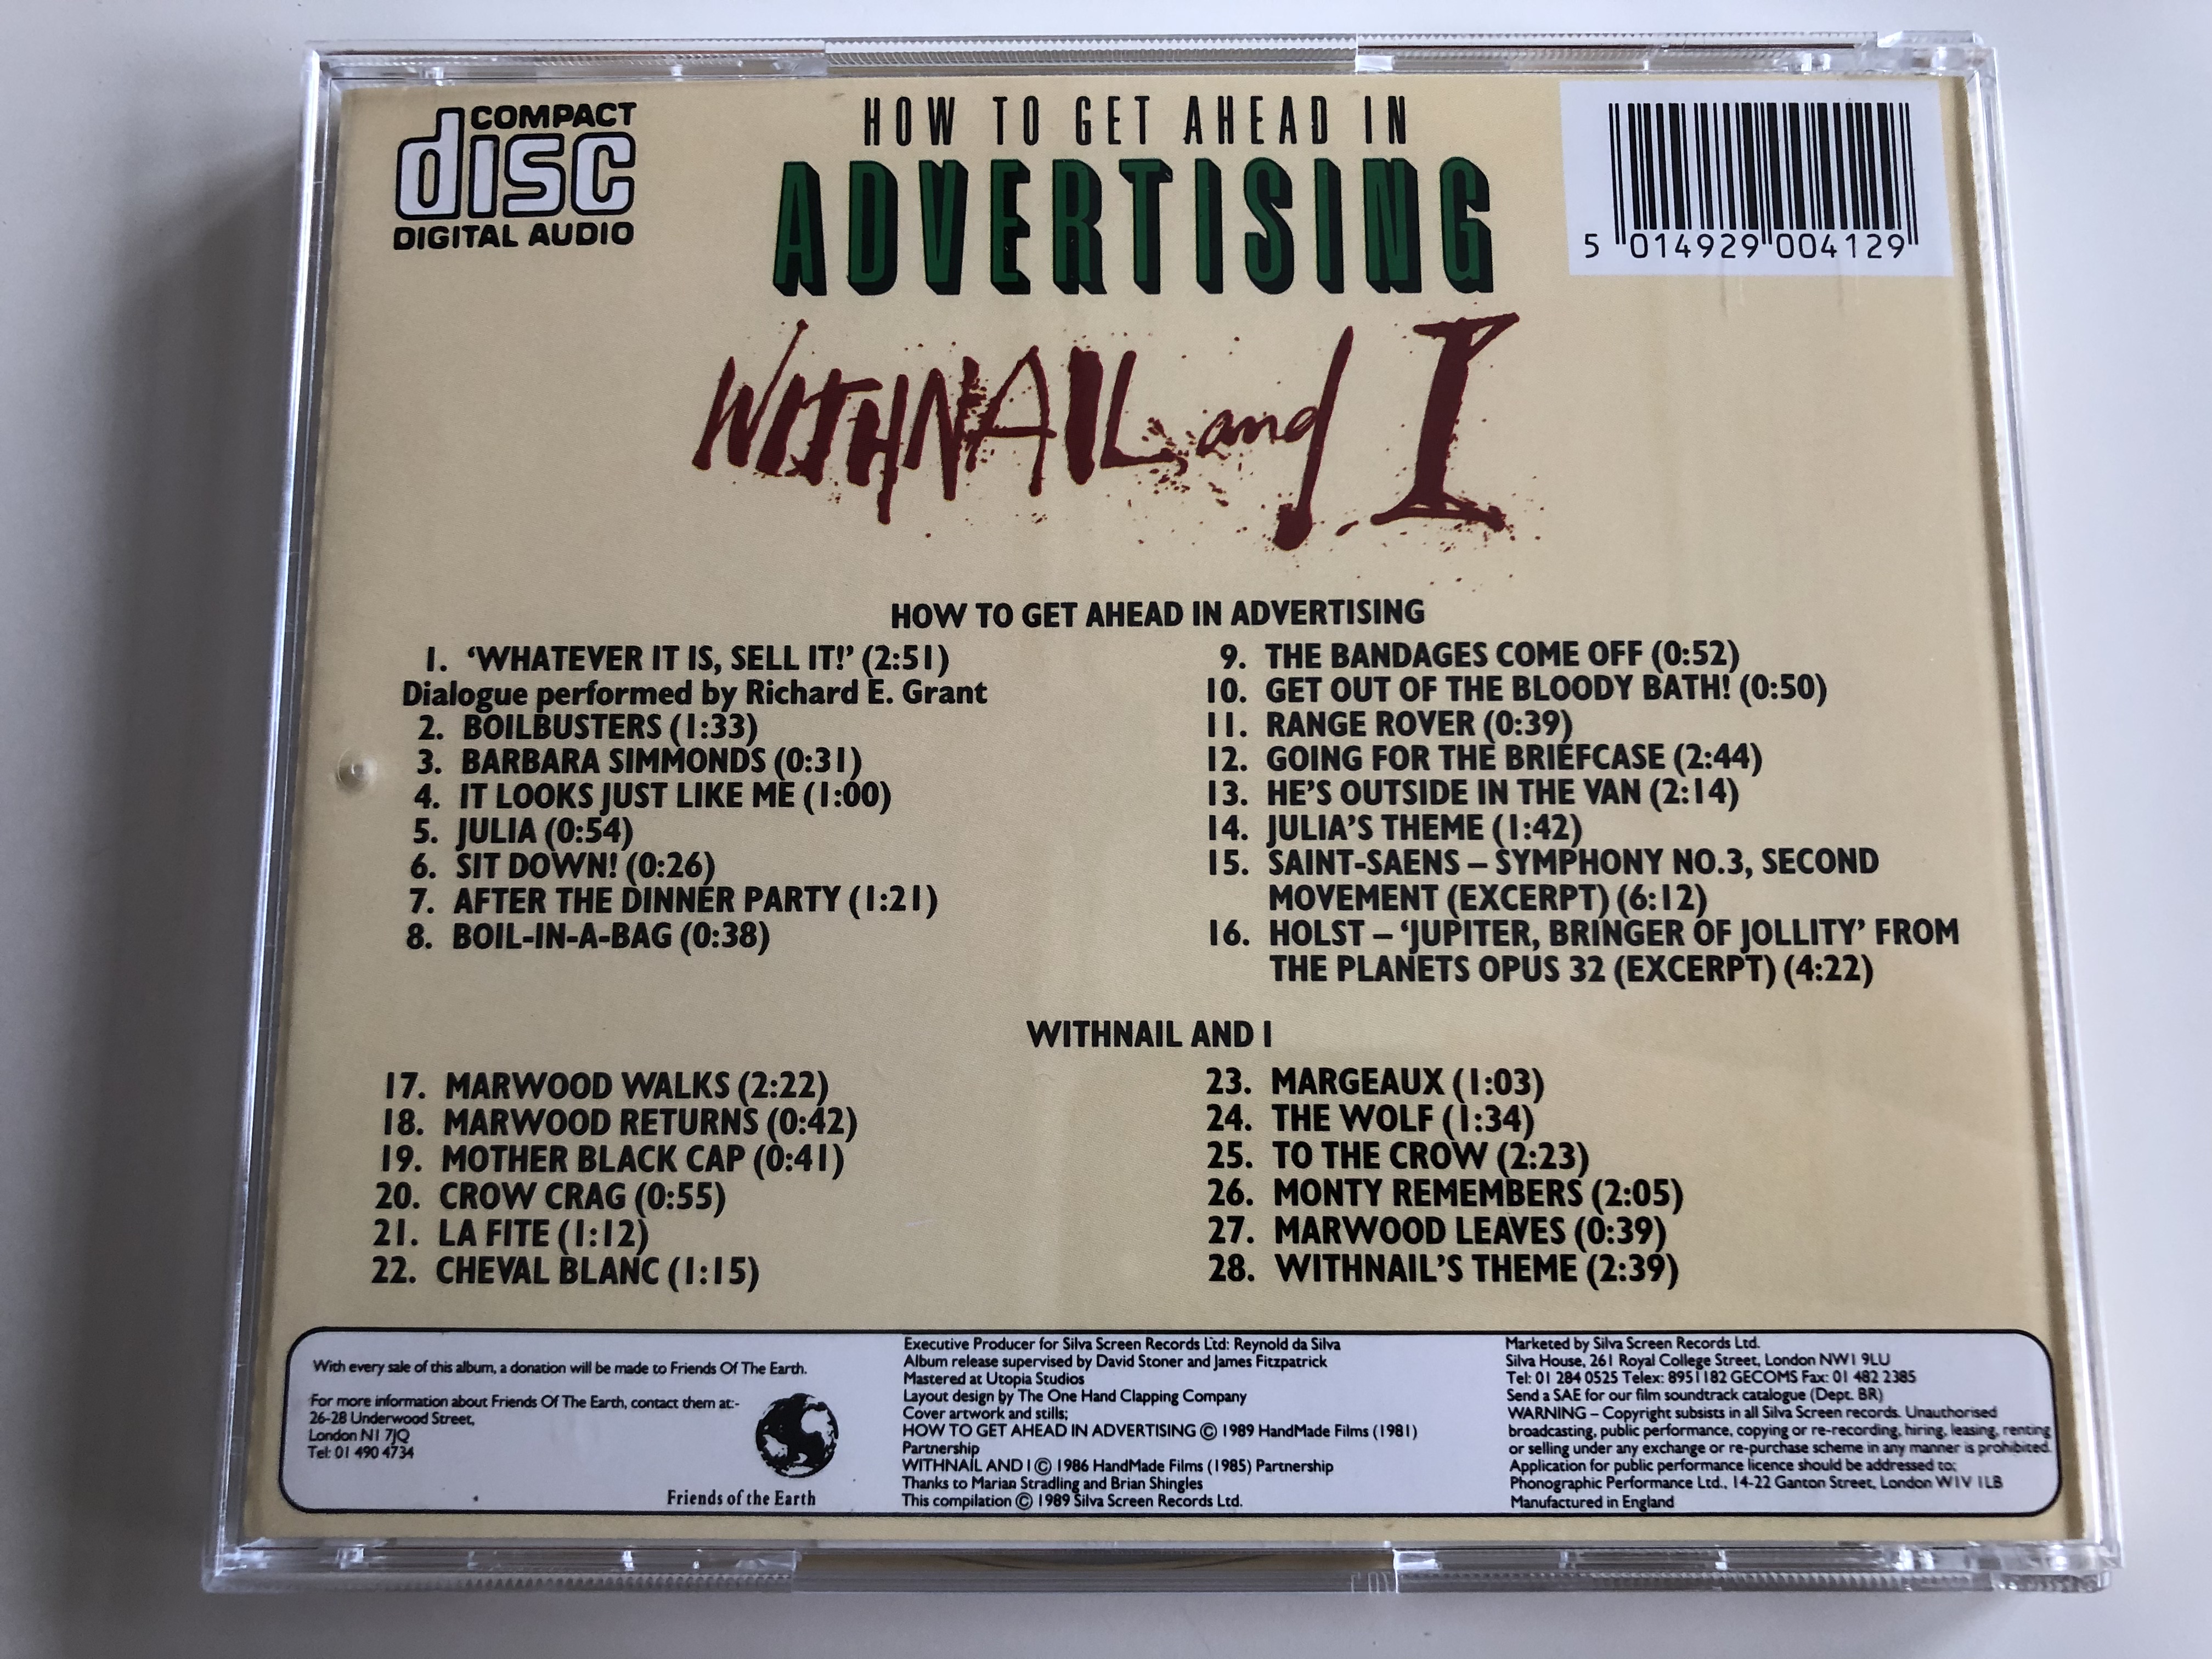 how-to-get-ahead-in-advertising-whitnail-and-i-original-music-by-david-dundas-rick-wentworth-original-motion-picture-scores-audio-cd-1989-filmcd-041-7-.jpg